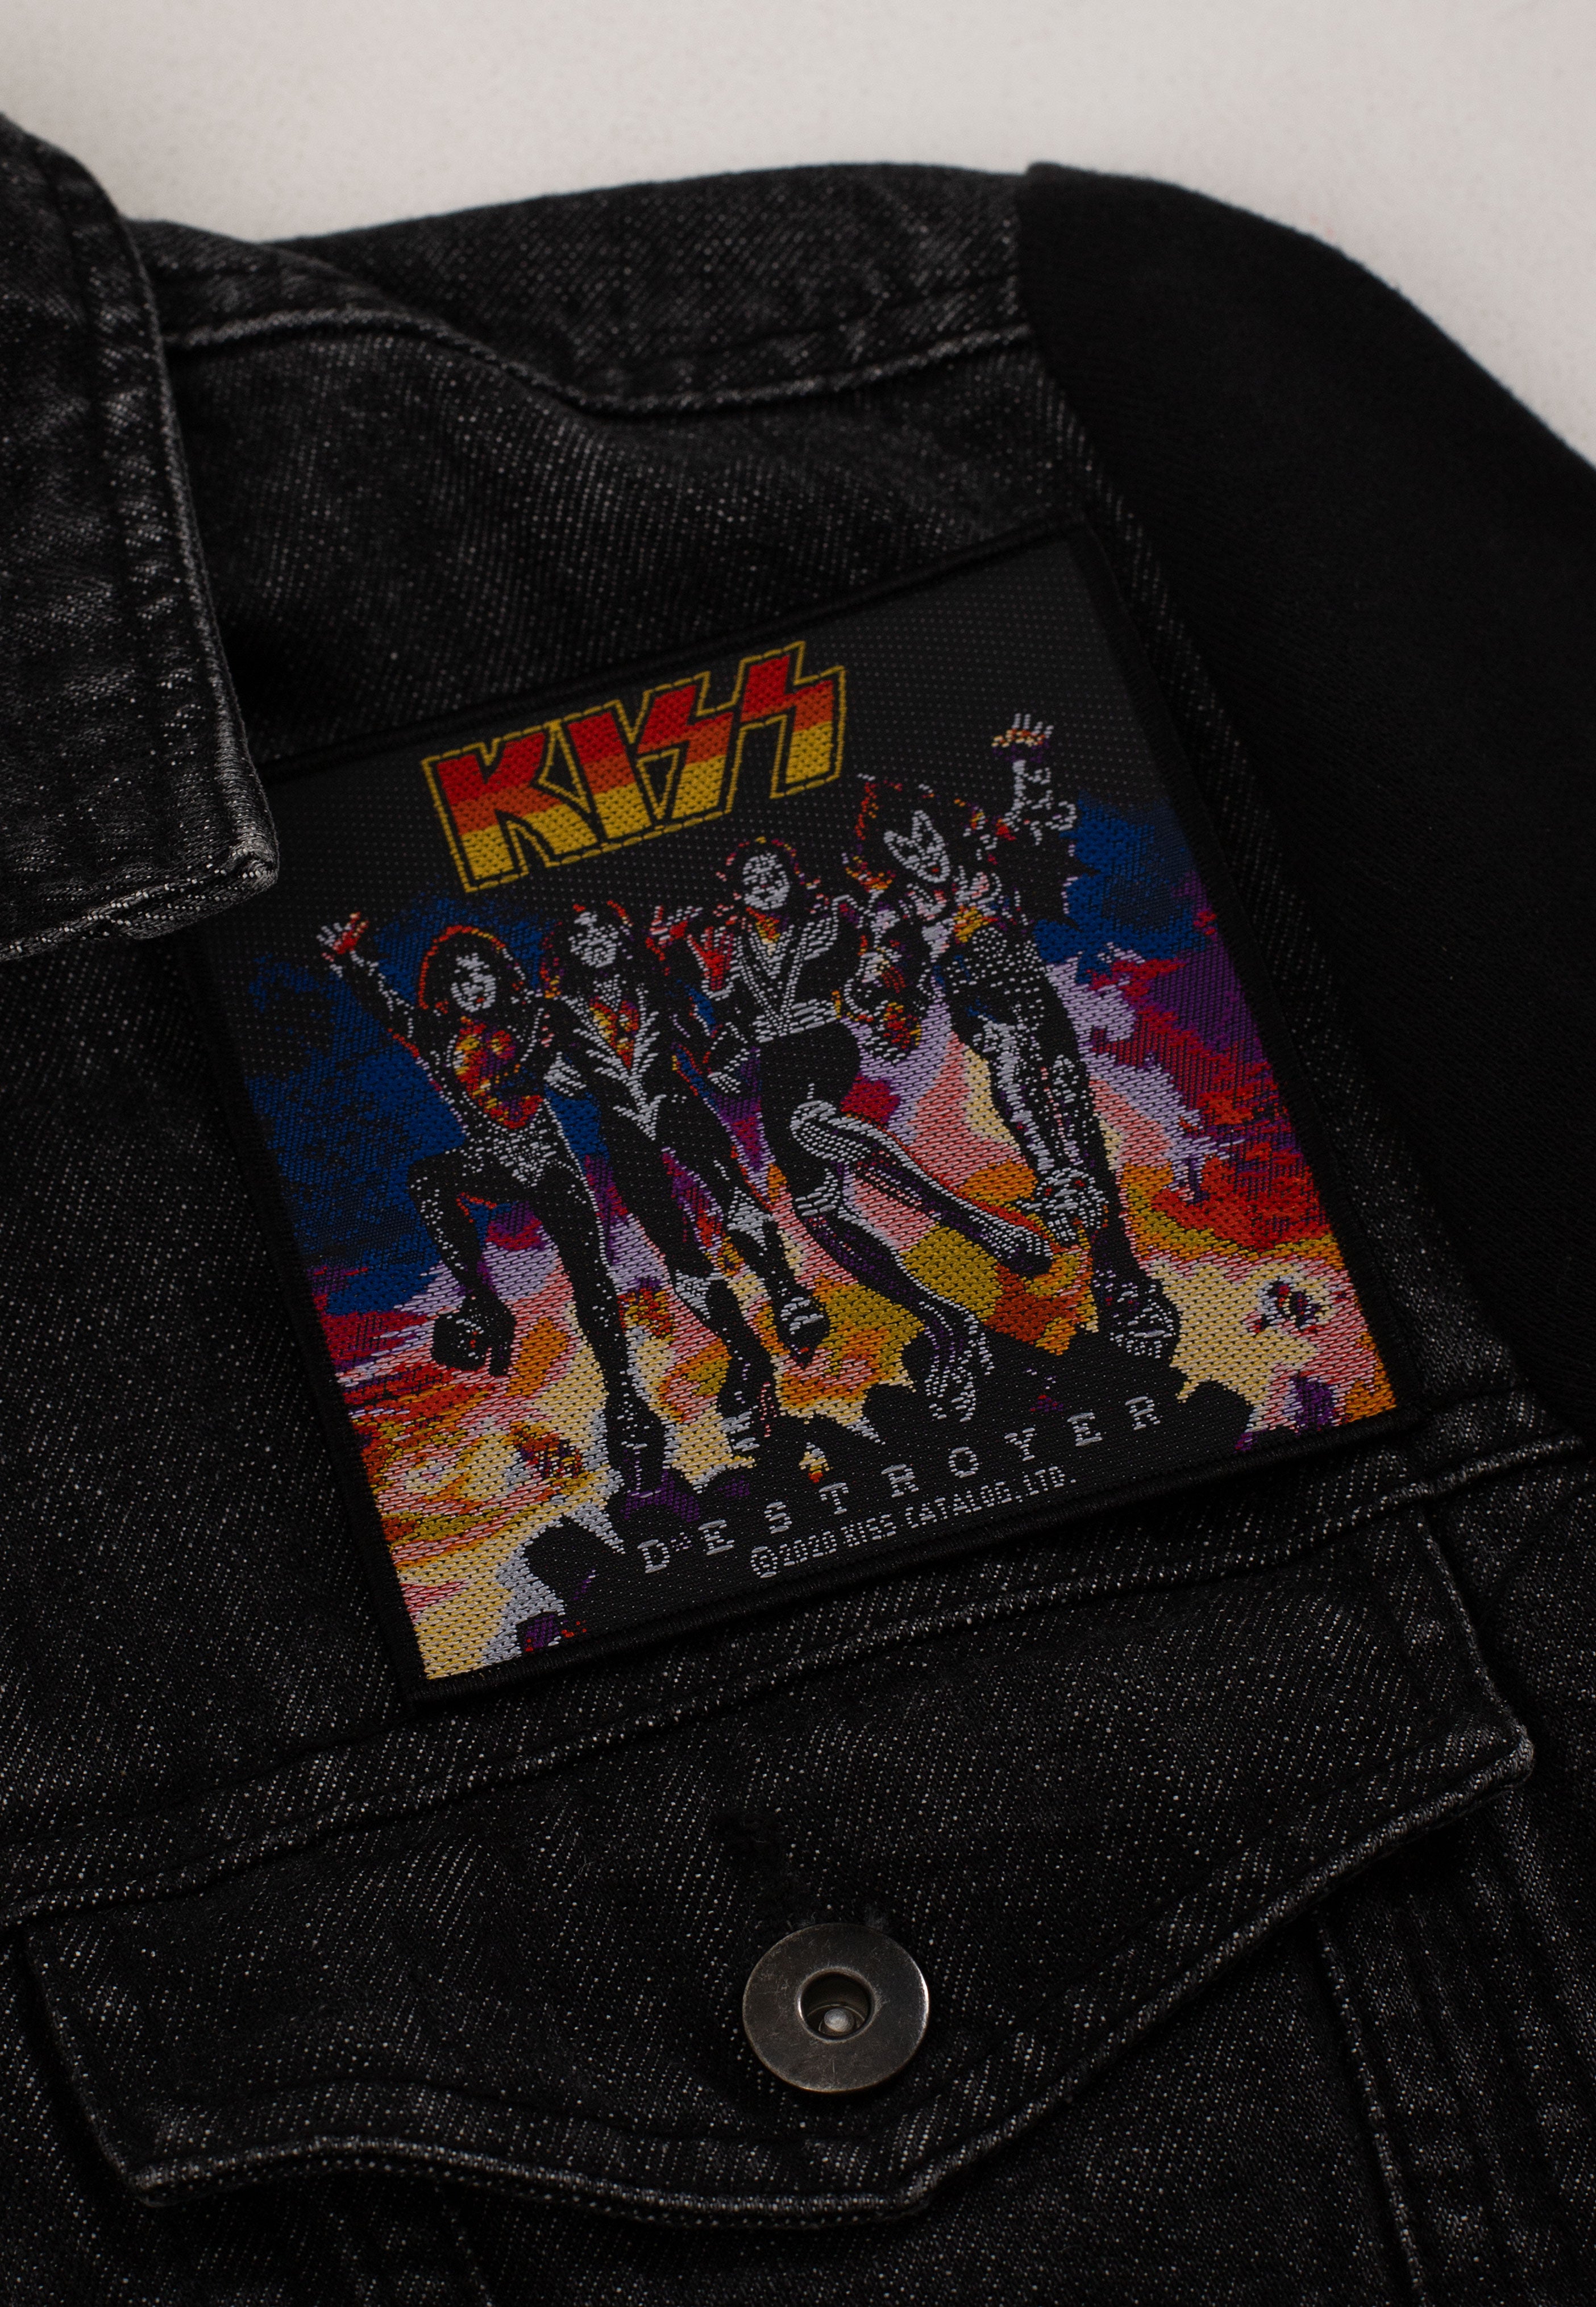 Kiss - Destroyer - Patch